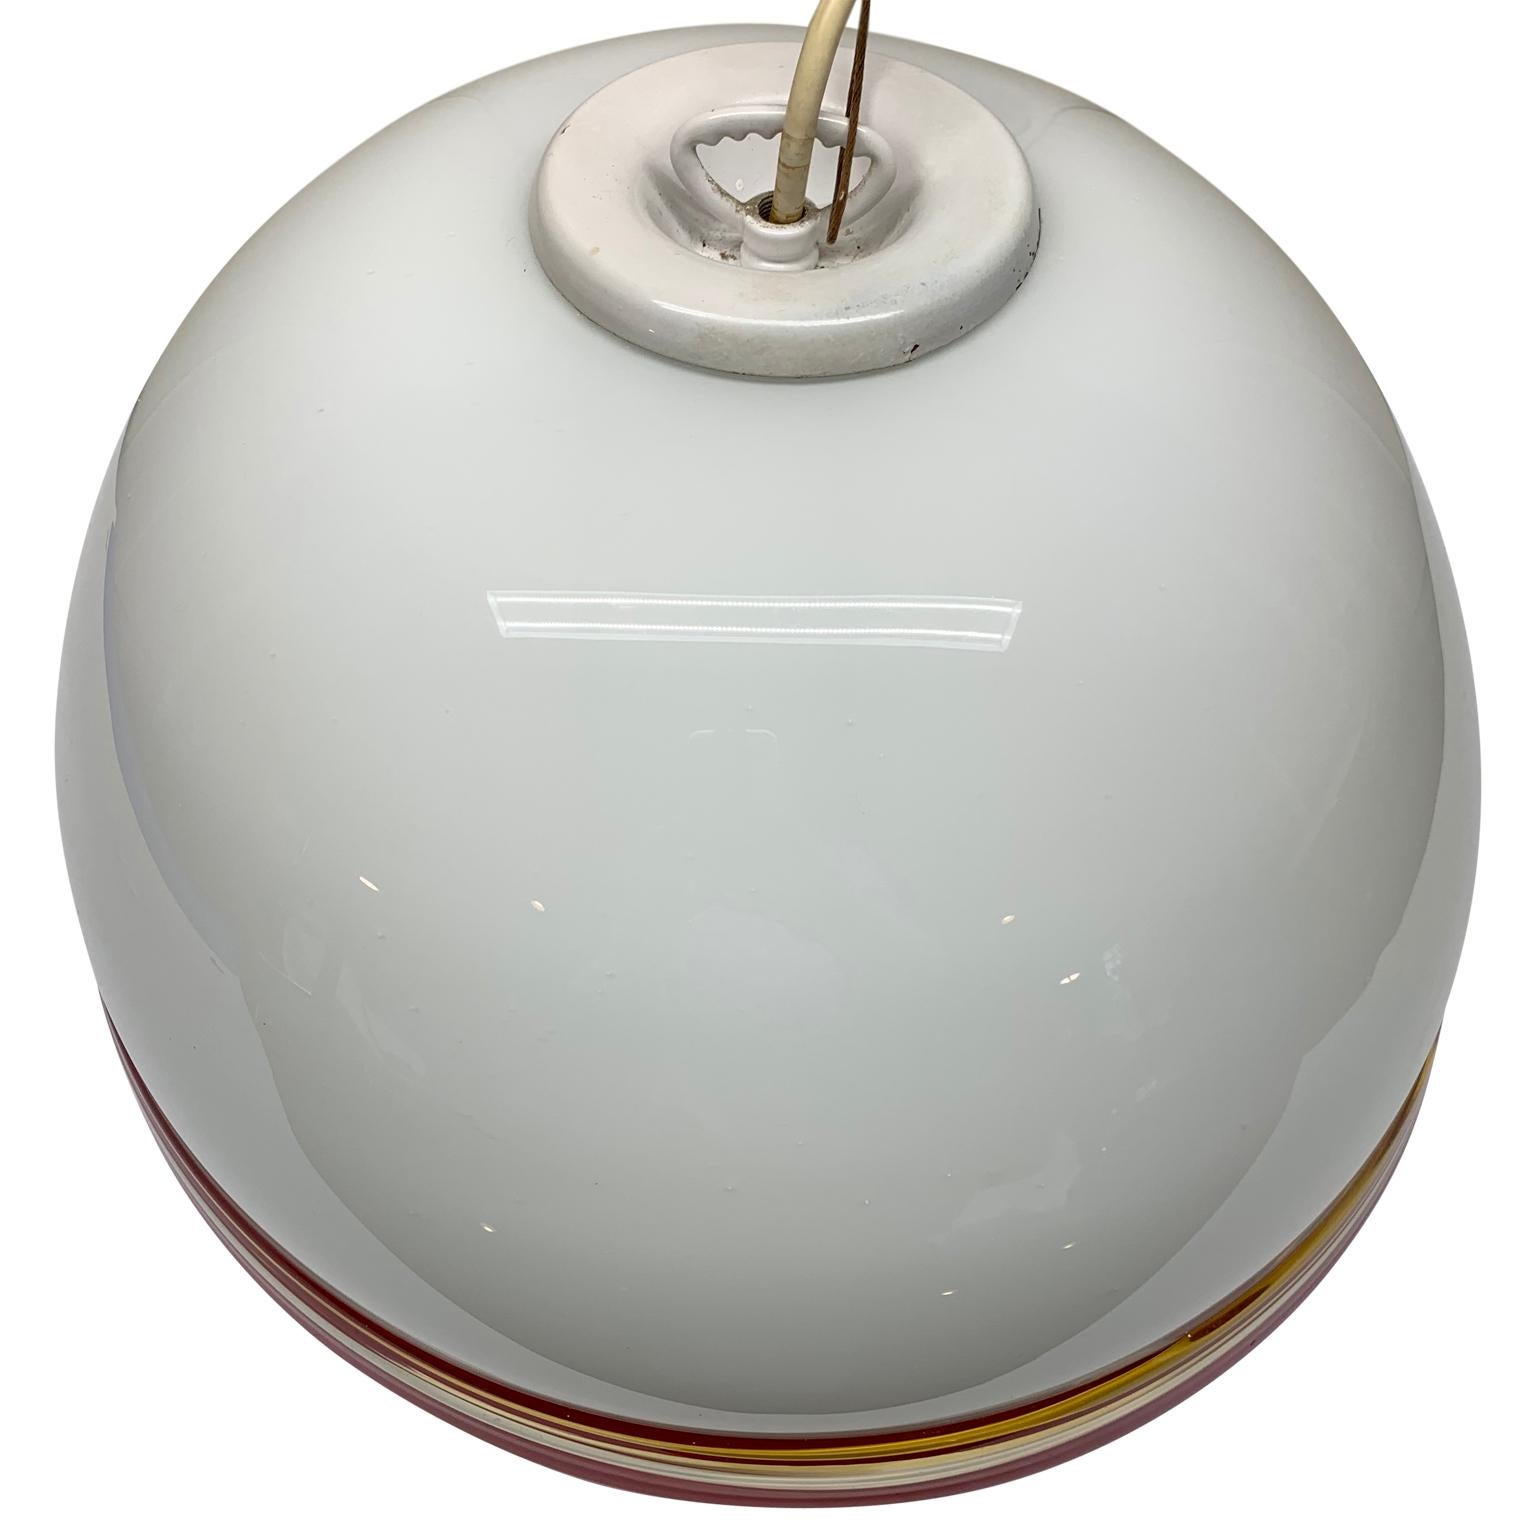 Large white, yellow and red Italian Murano Art glass dome pendant light.

Attributed to Effetre International, Italy.
The Murano glass is predominantly opaline white with clear, red, yellow art glass trim.
 